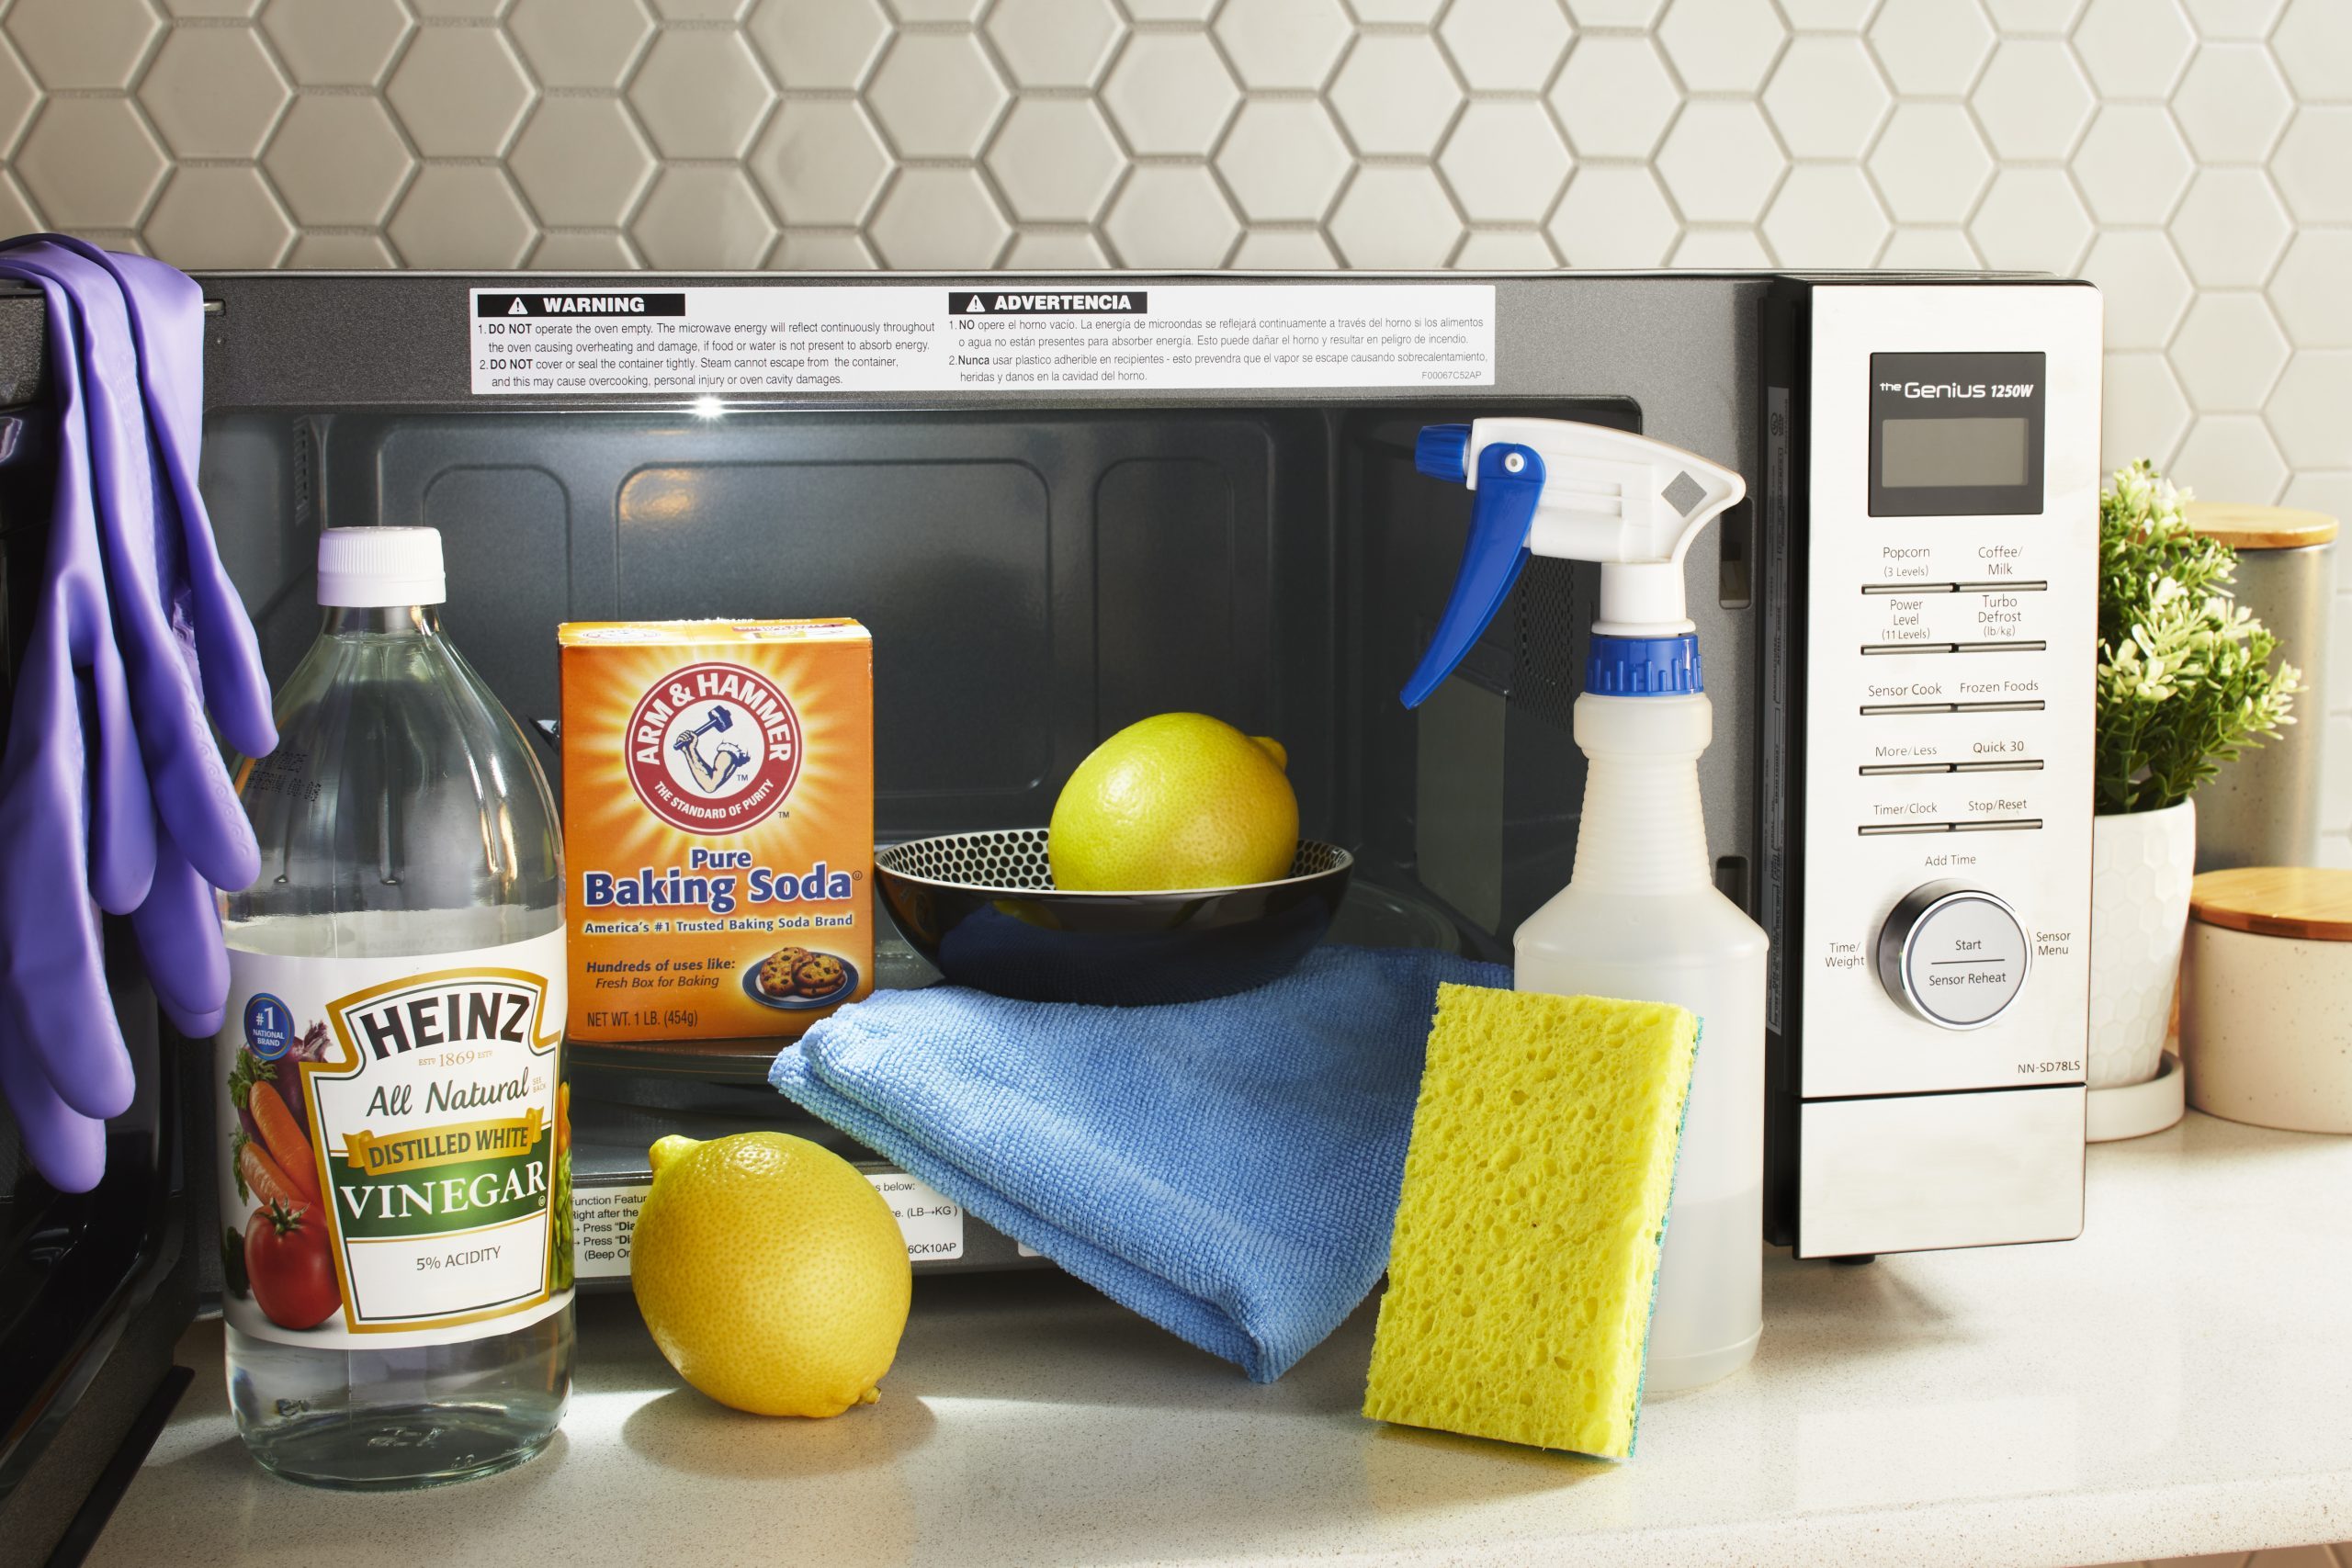 How to Clean a Microwave: Step by Step with Photos and Video